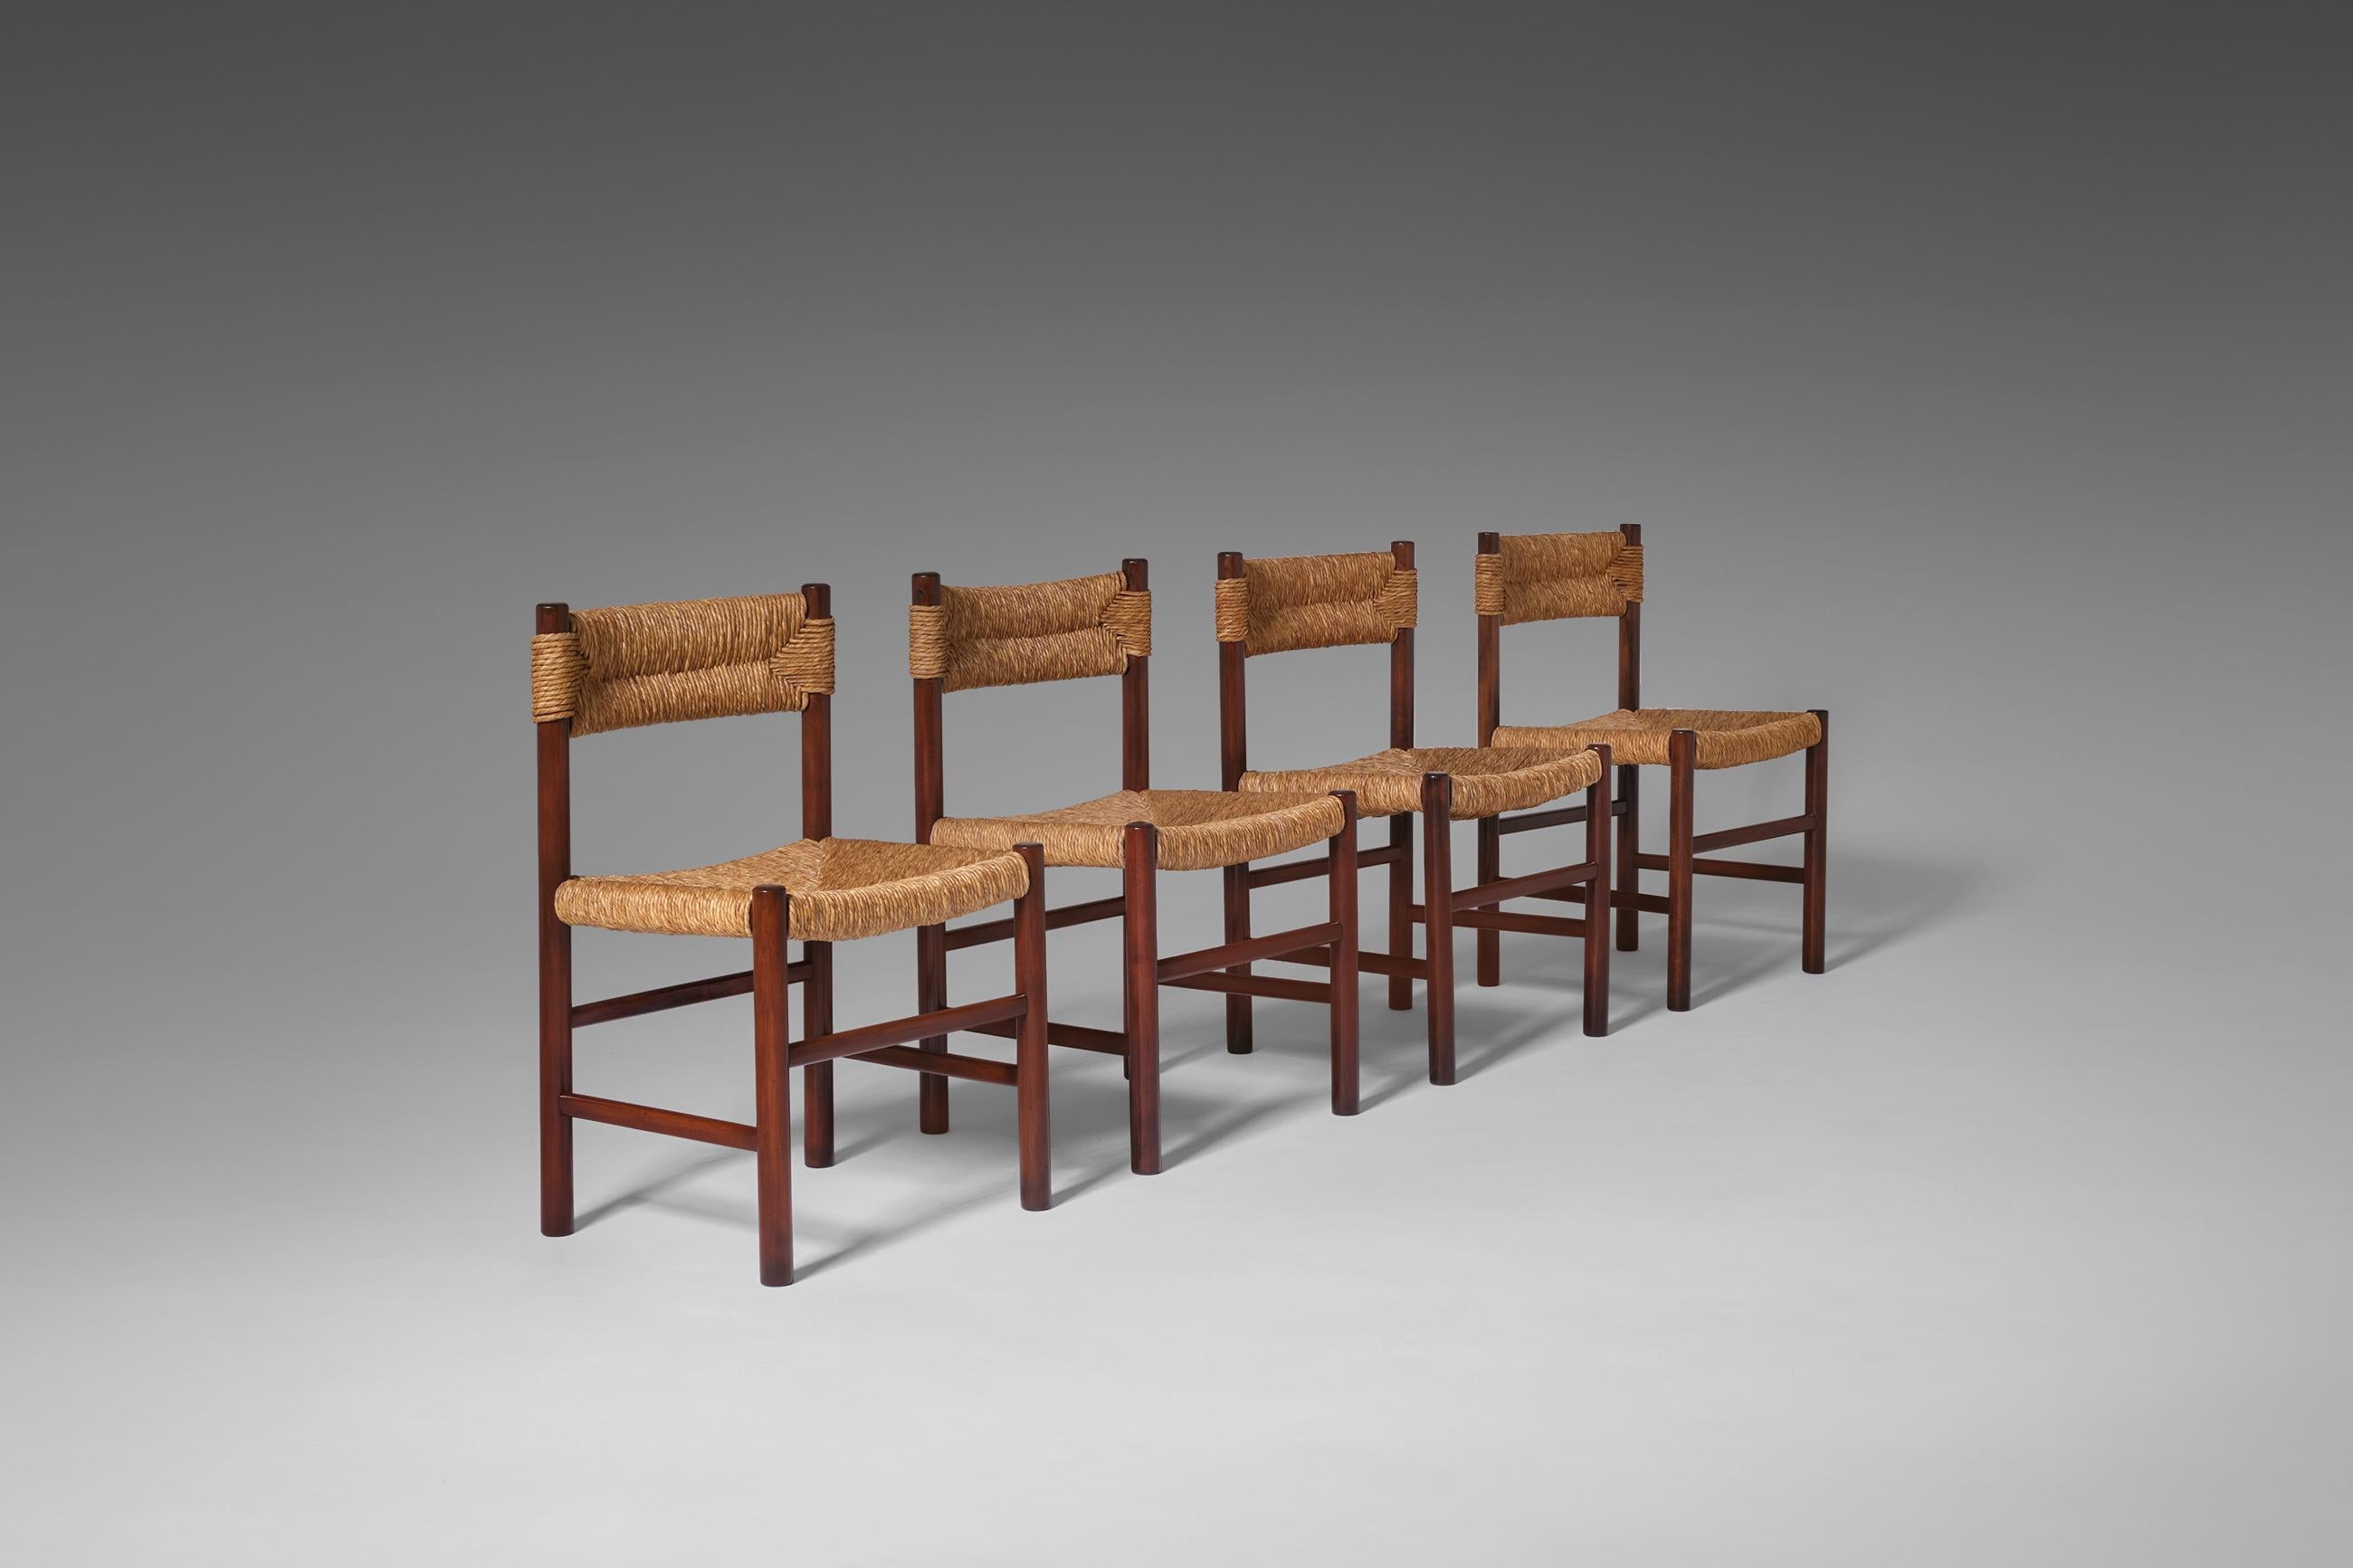 Set of four dining chairs, France, 1960's. Sculptural yet modest design often attributed to Robert Sentou for Charlotte Perriand. The chairs are made of solid stained Ash and rush seat and backrest in a beautiful woven pattern. The chairs provide a